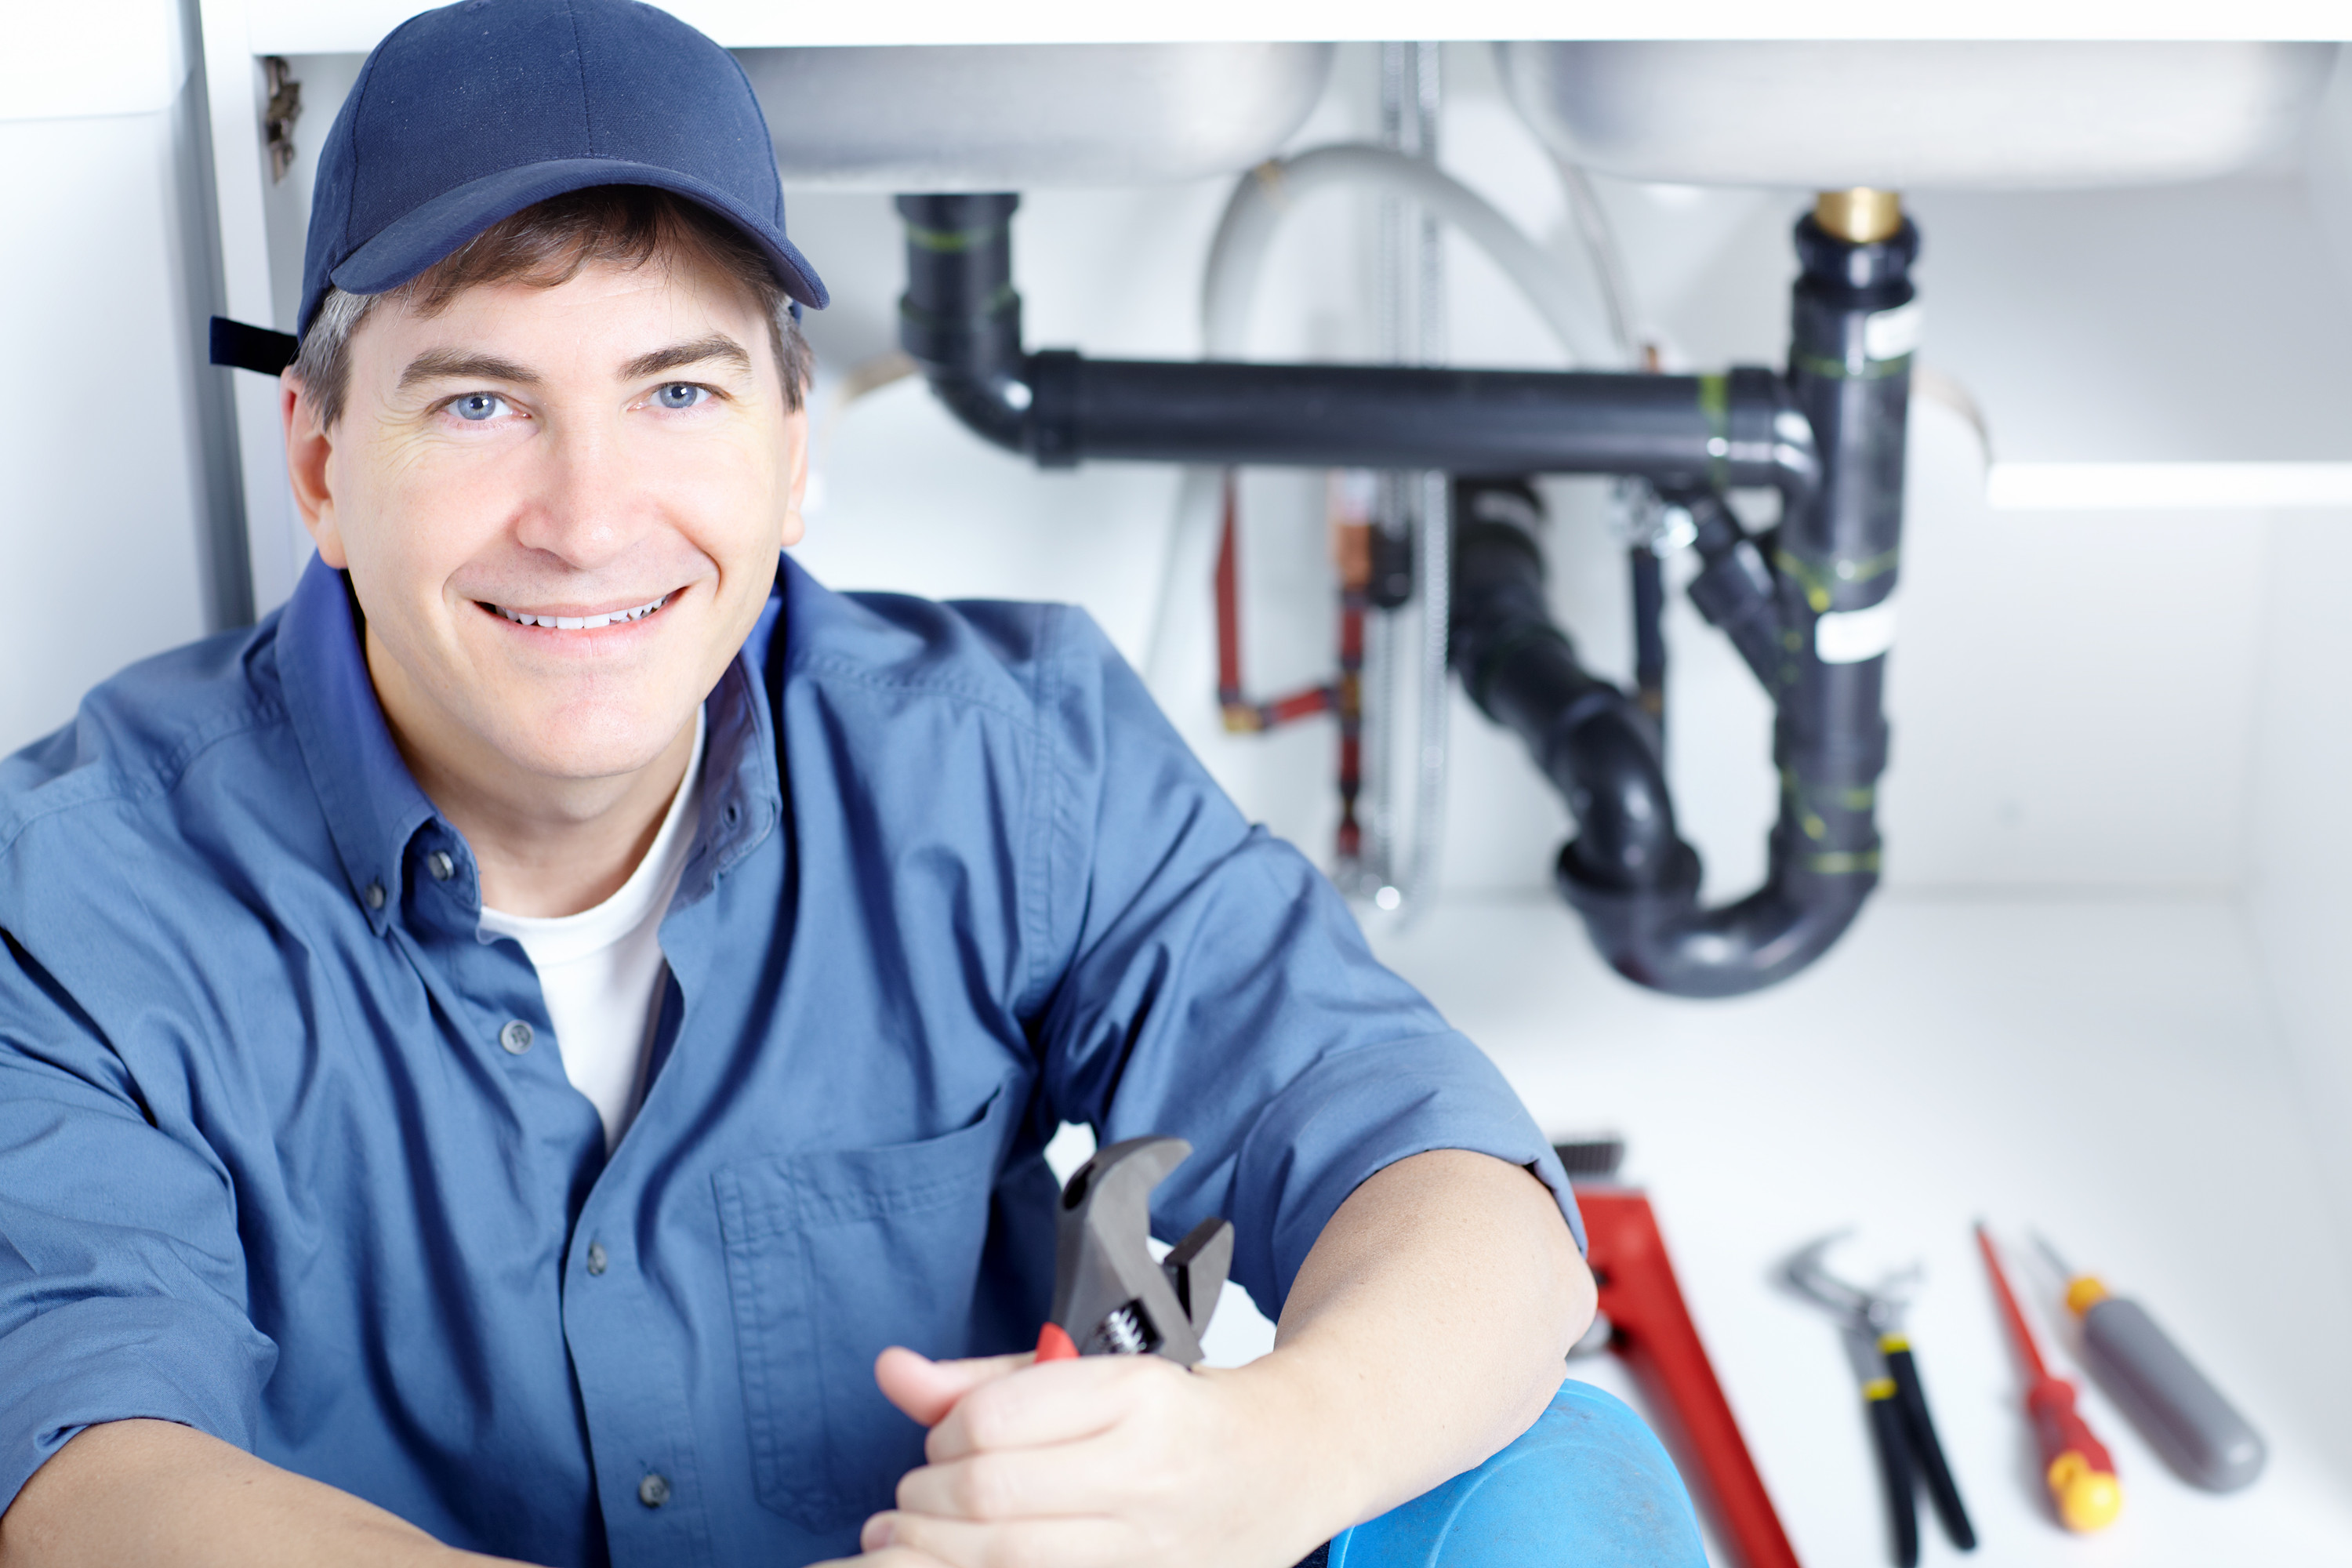 Getting Help From Commercial Plumbers – How Do You Know When To Get Help?